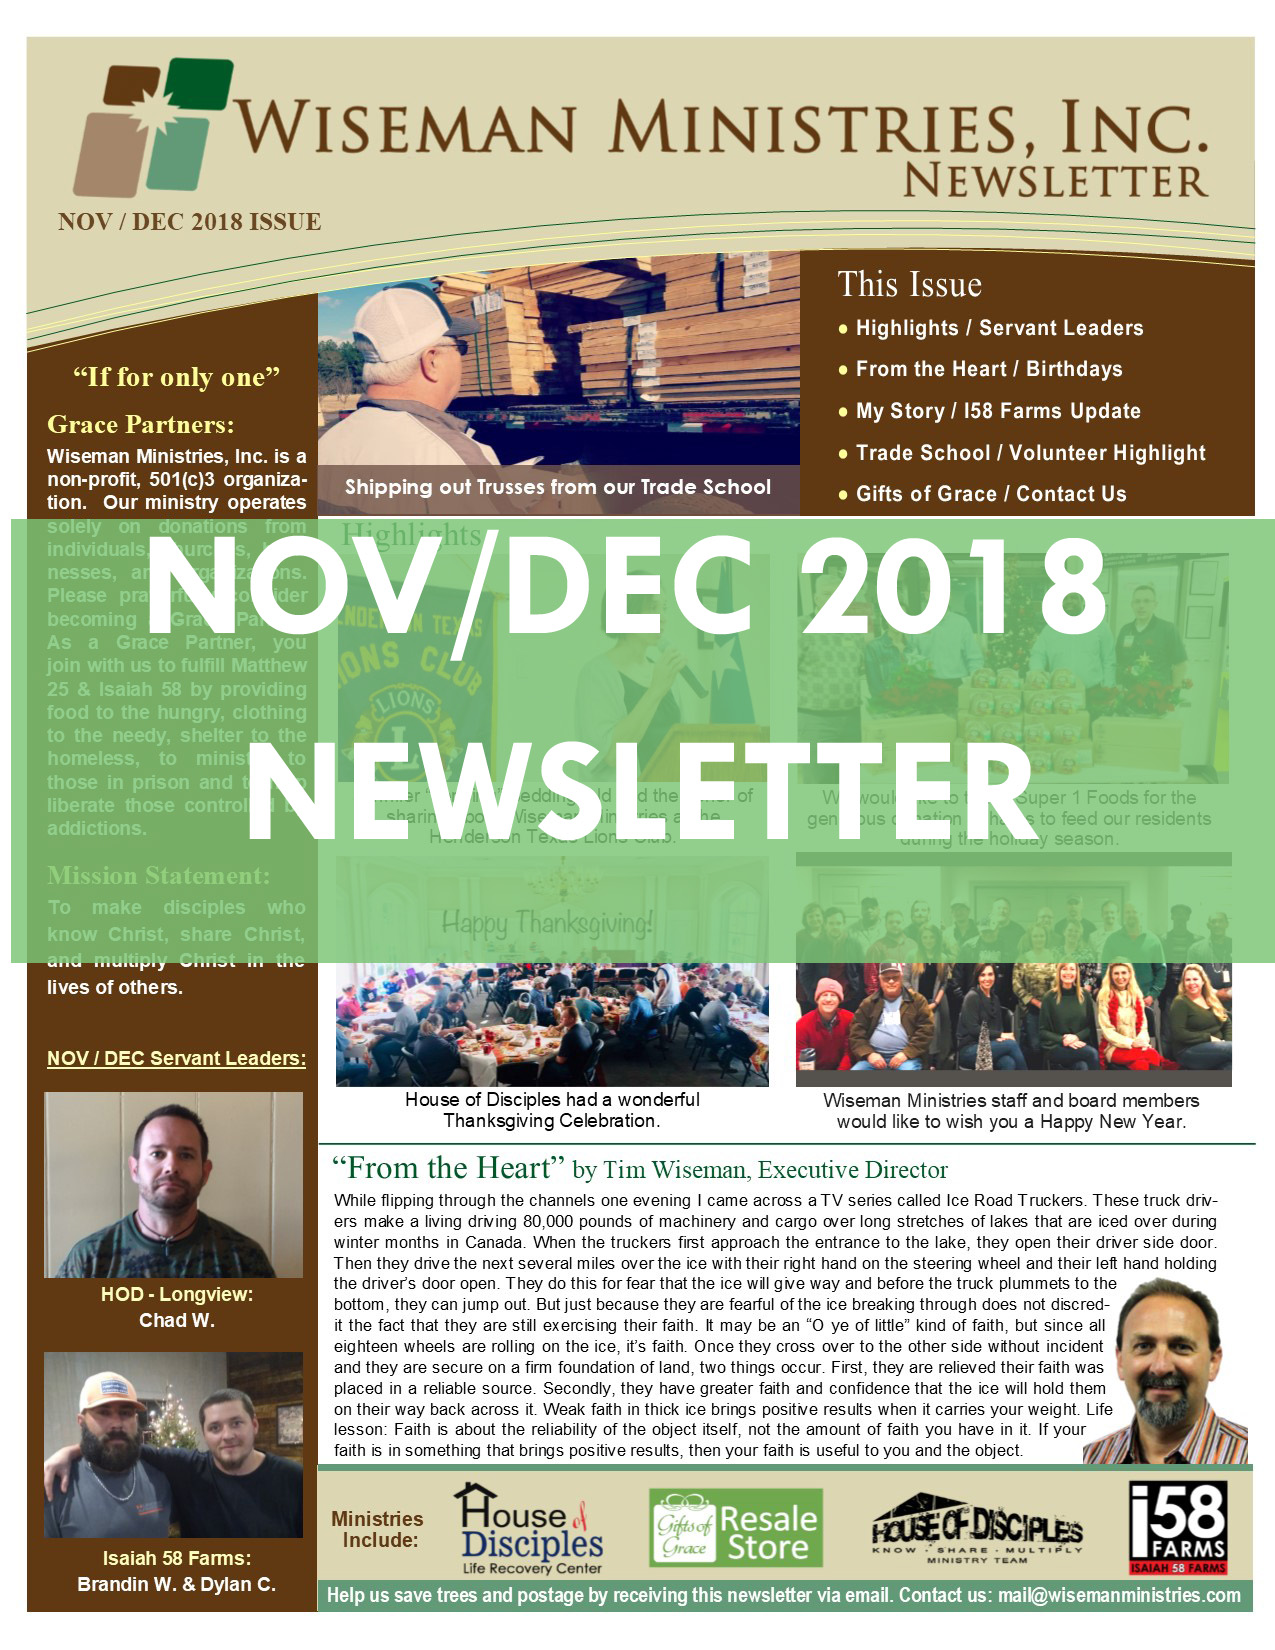 examples of newsletters 2018